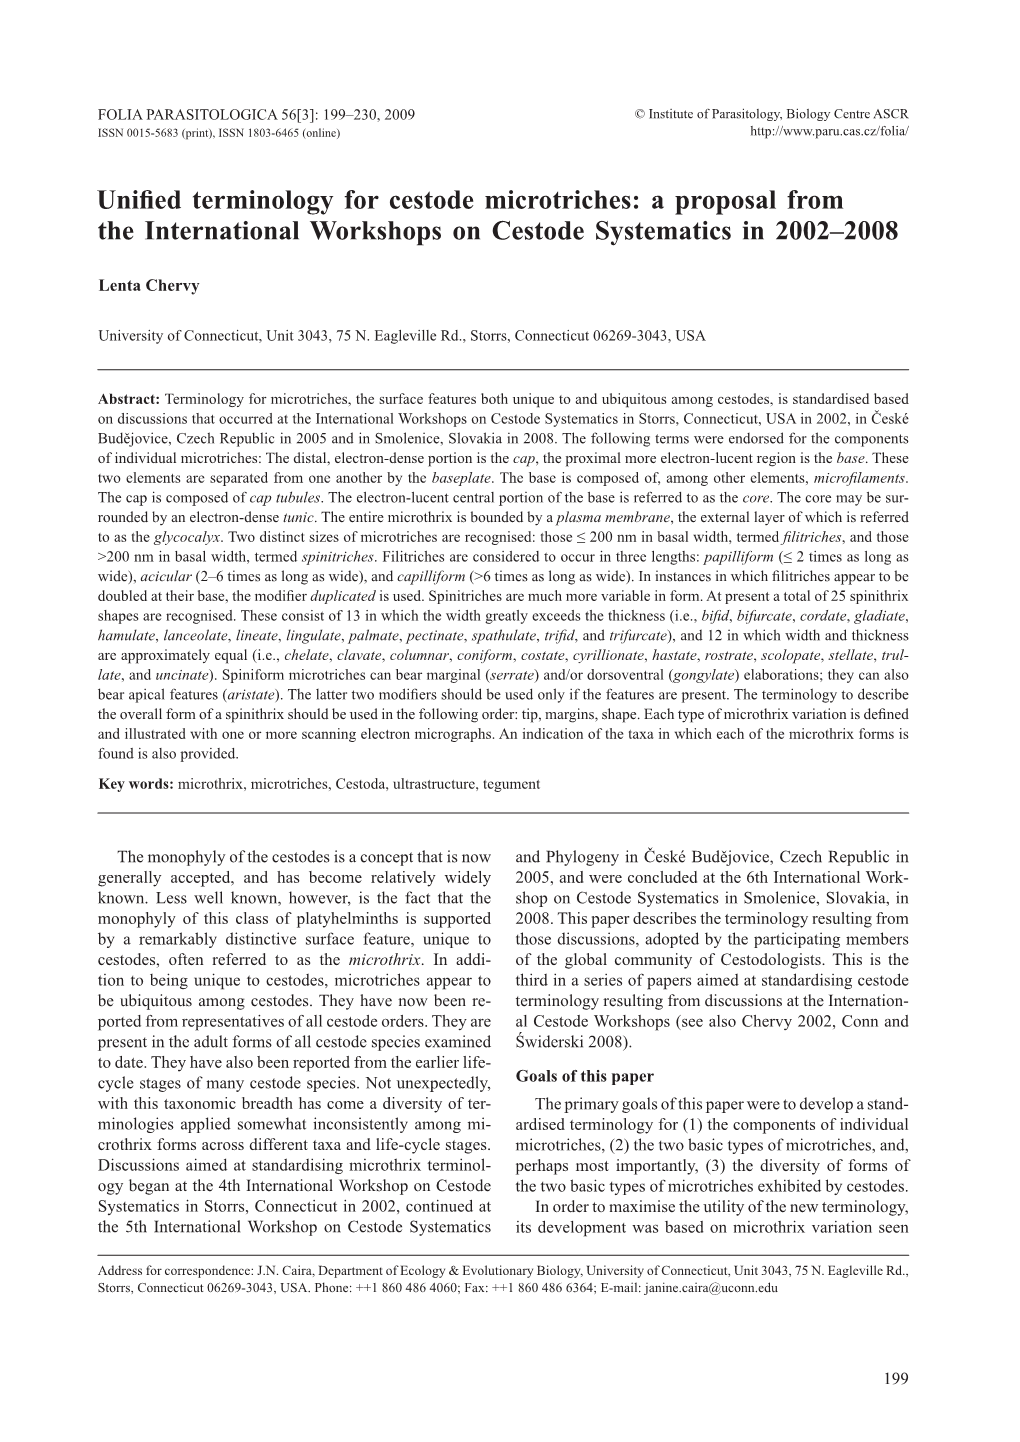 Unified Terminology for Cestode Microtriches: a Proposal from the International Workshops on Cestode Systematics in 2002–2008